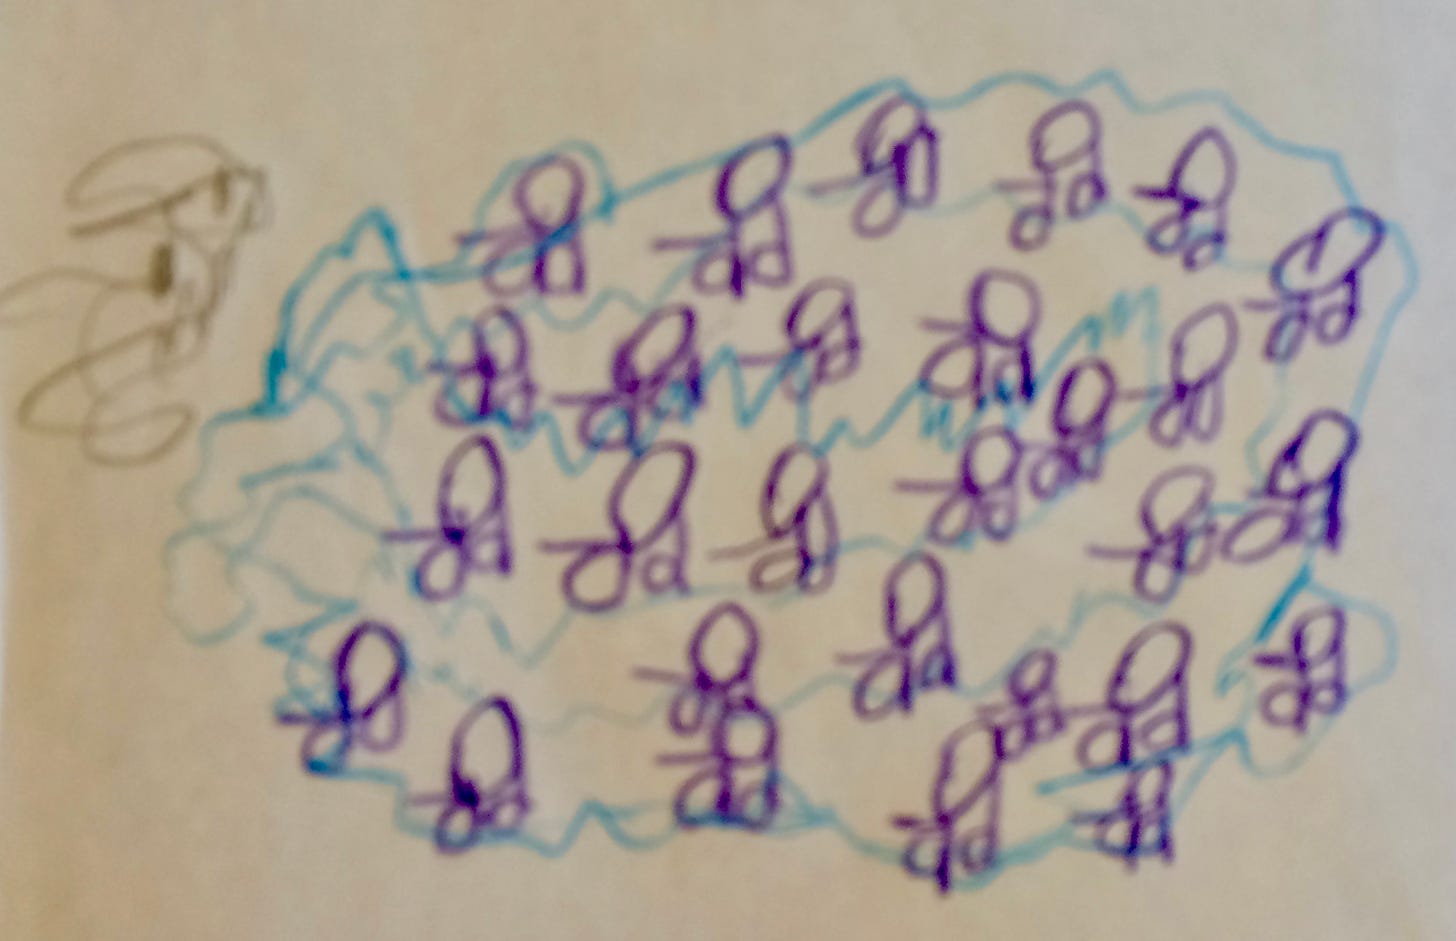 Purple figures with sticklike guns surrounded with blue squiggly lines, some in between the figures, moving toward dark penciled figure